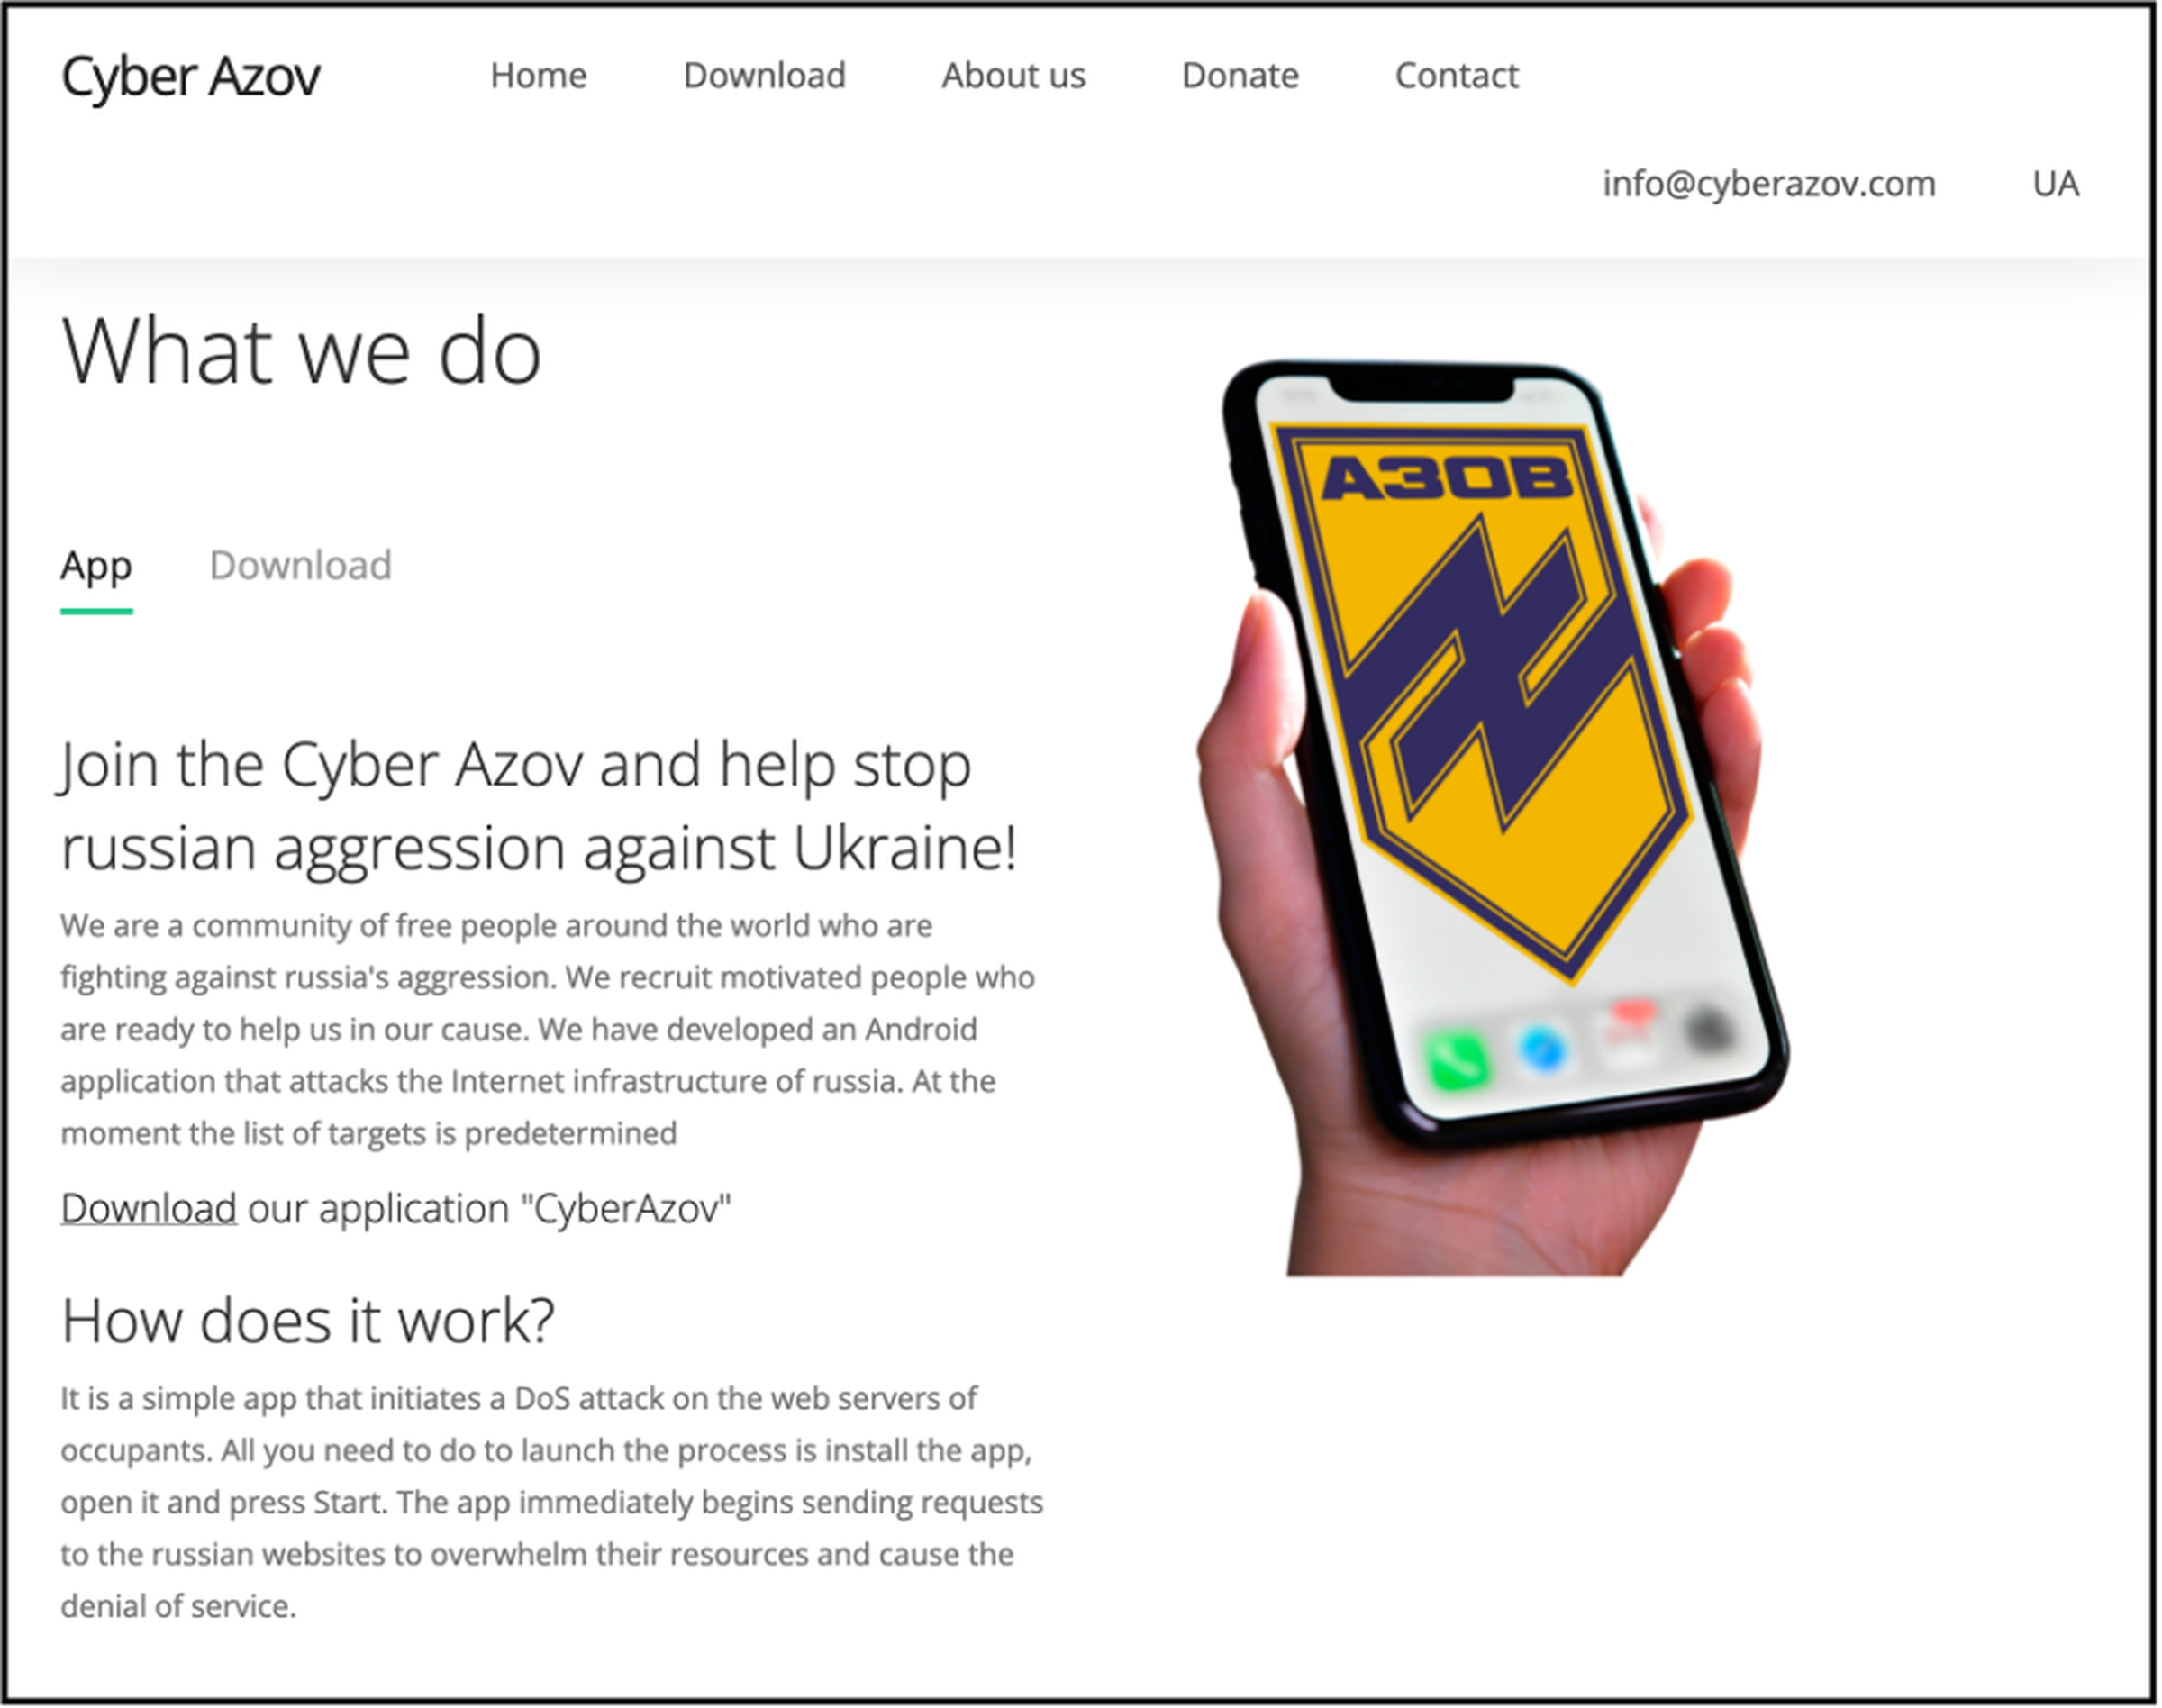 A web page screenshot shows an app labelled “Azov” in the Cyrillic alphabet, with a description asking users to “Join Cyber Azov and help stop Russian aggression against Ukraine”